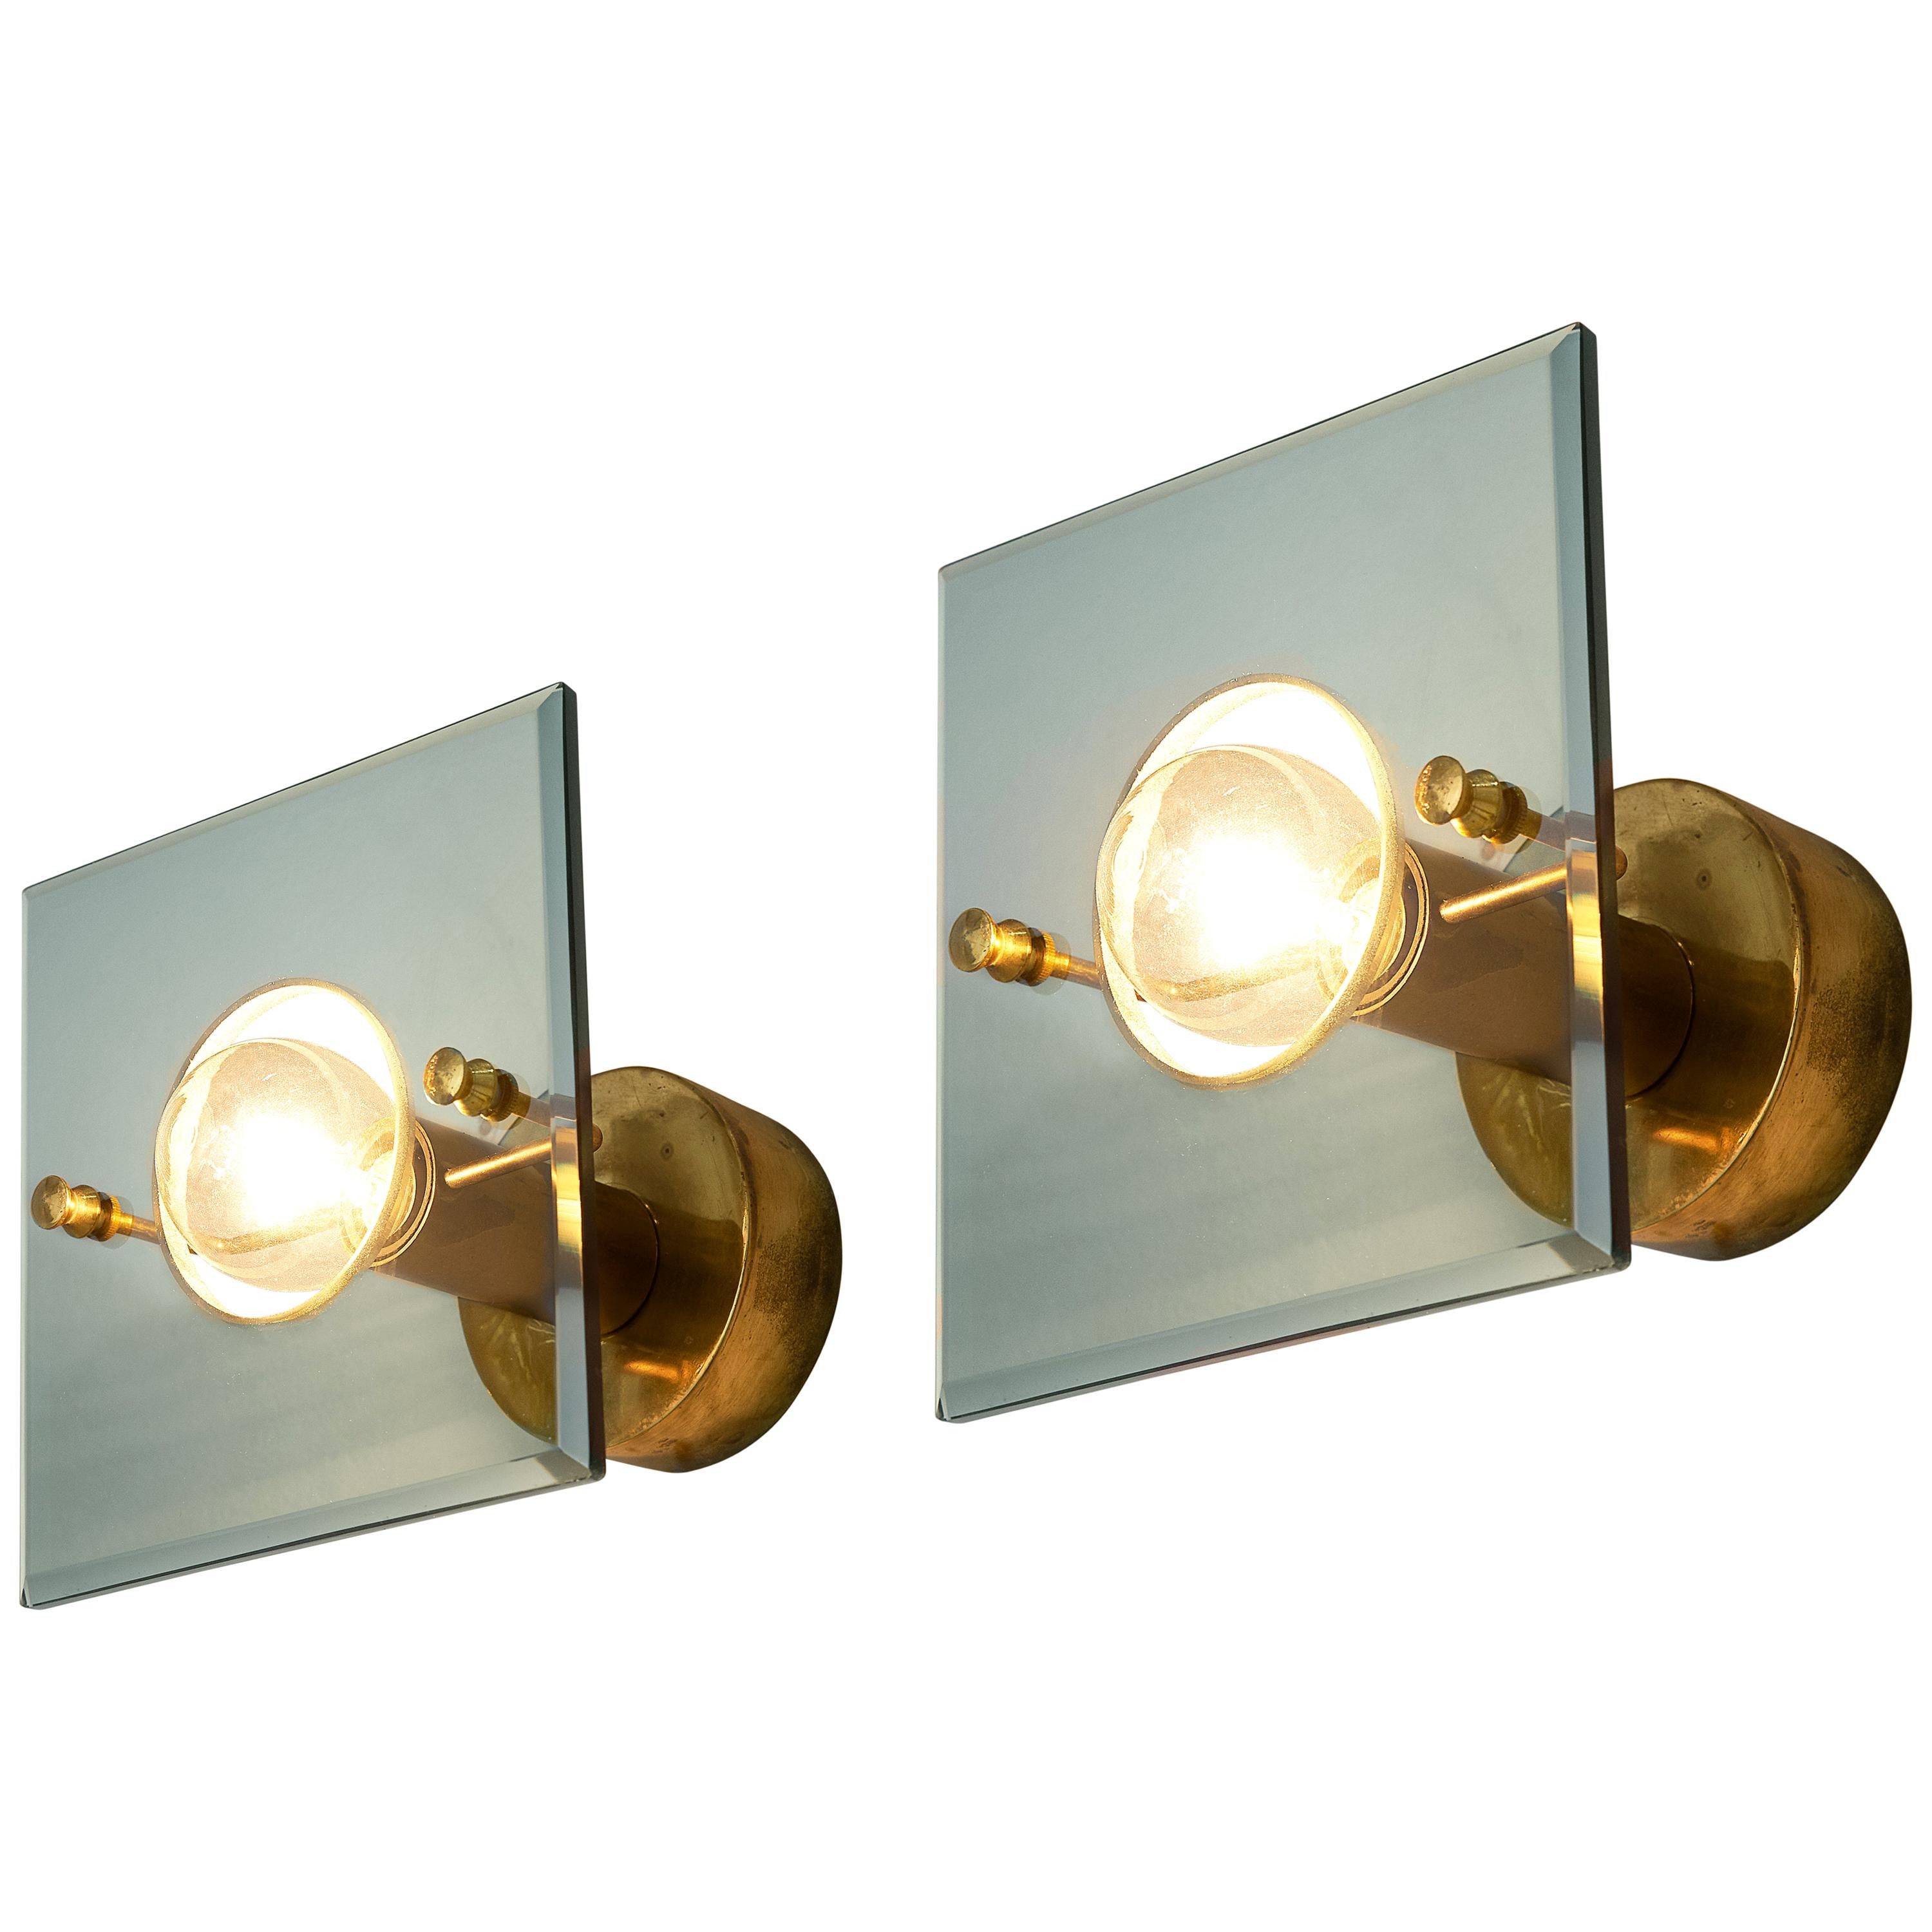 Gino Paroldo Pair of Wall Lights in Brass and Glass